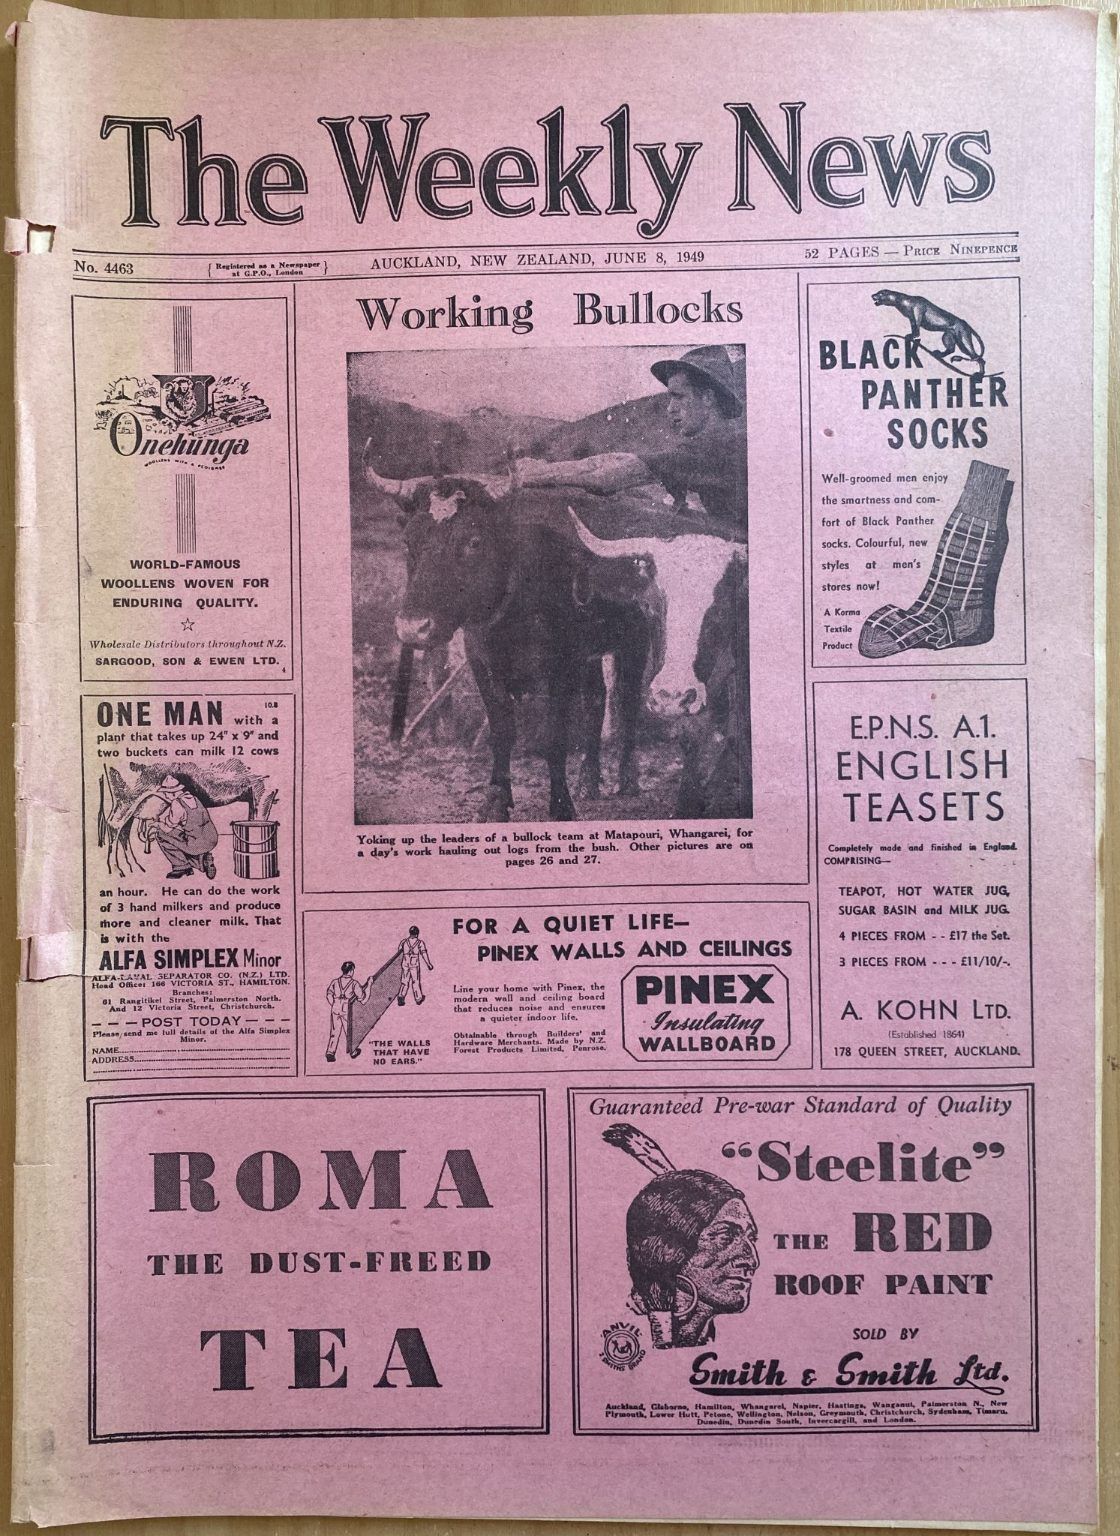 OLD NEWSPAPER: The Weekly News, No. 4463, 8 June 1949